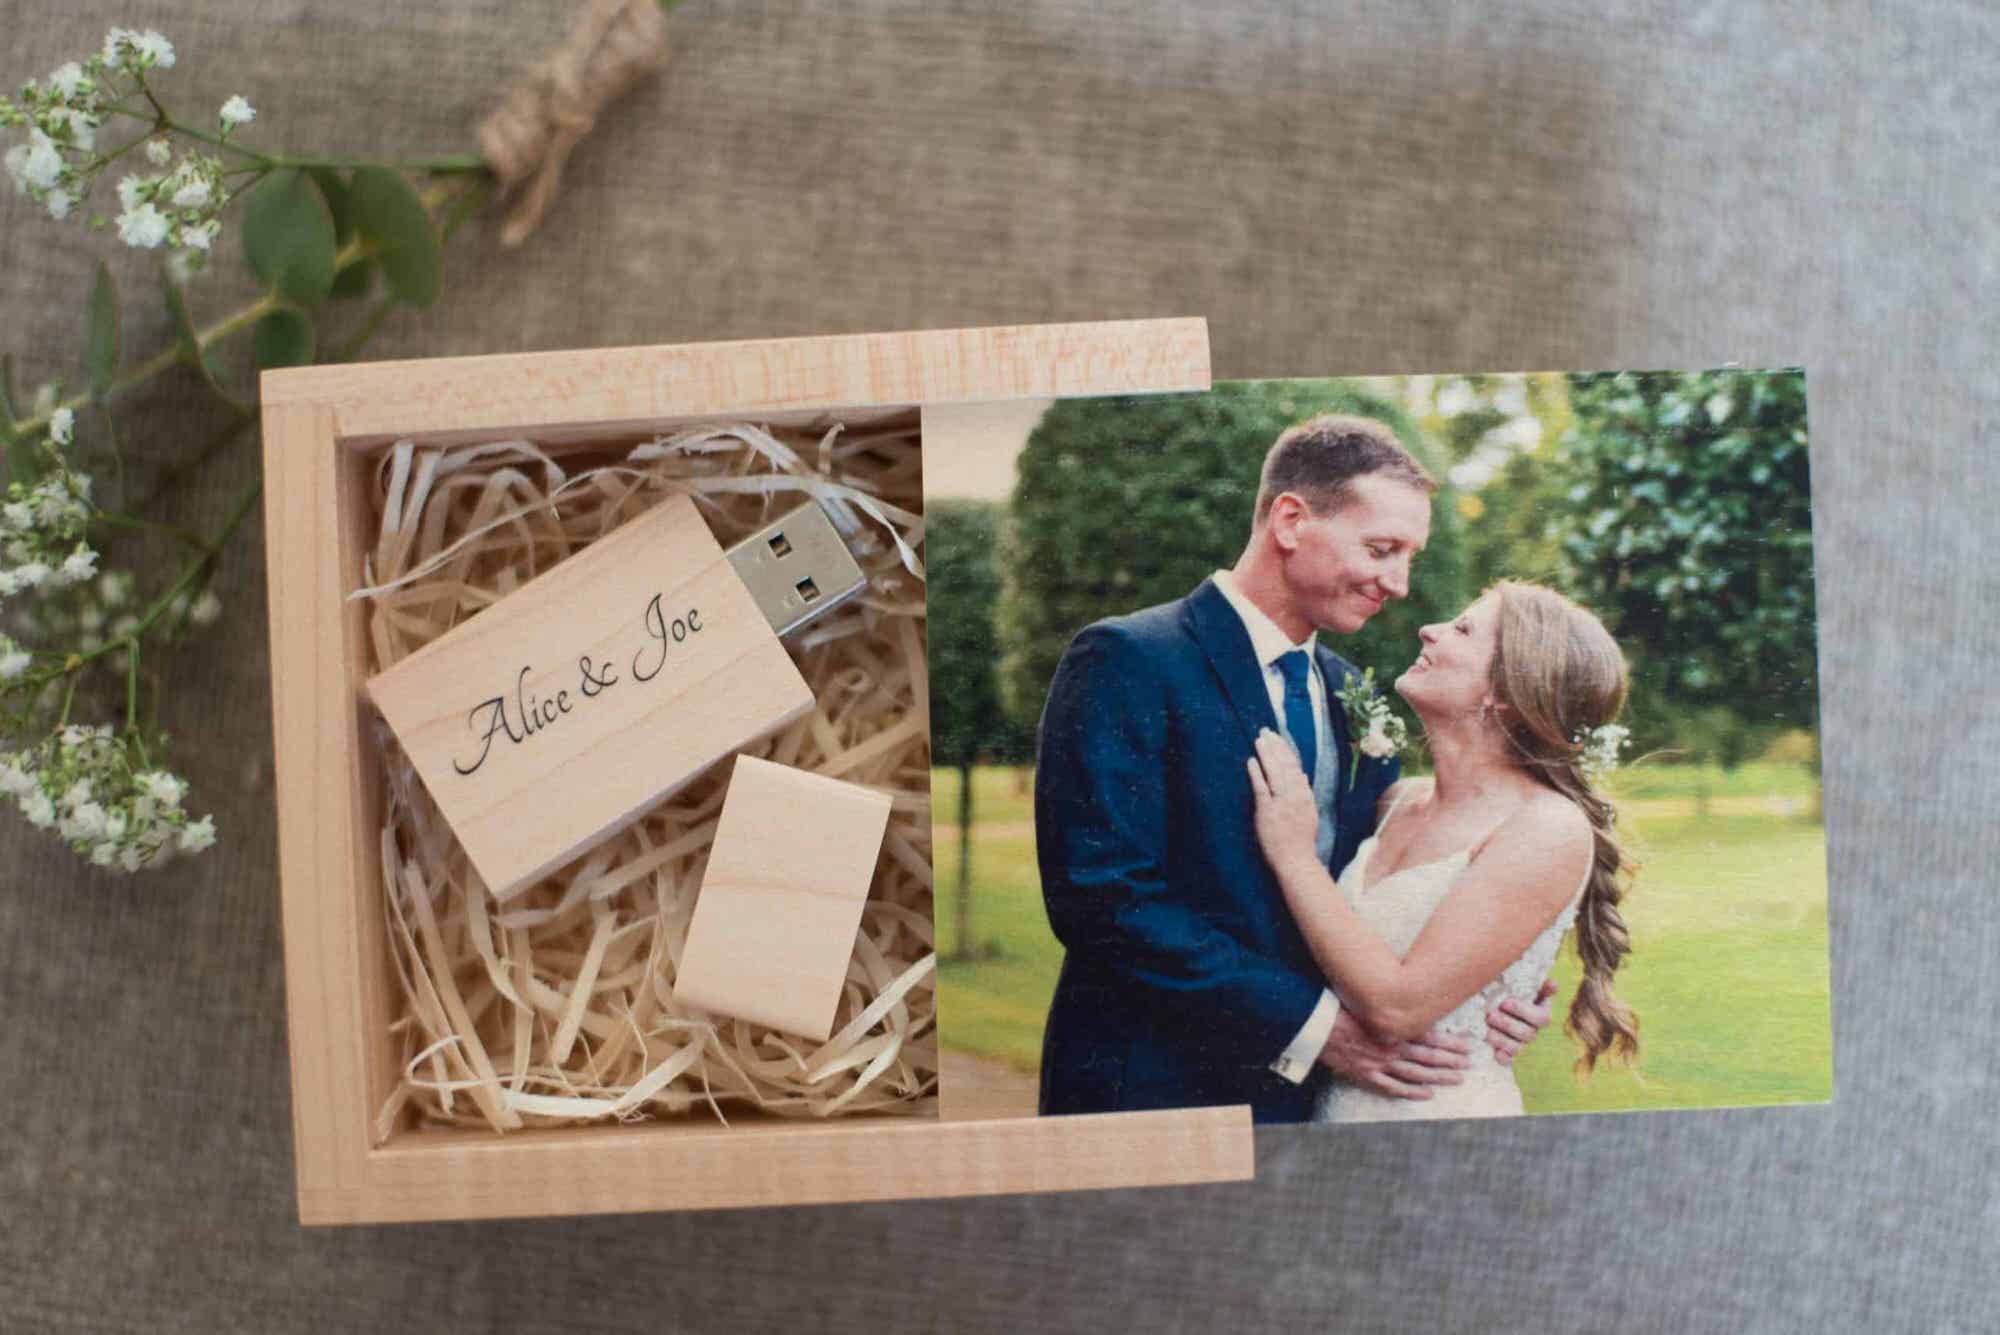 Personalised USB Stick and Box for wedding clients